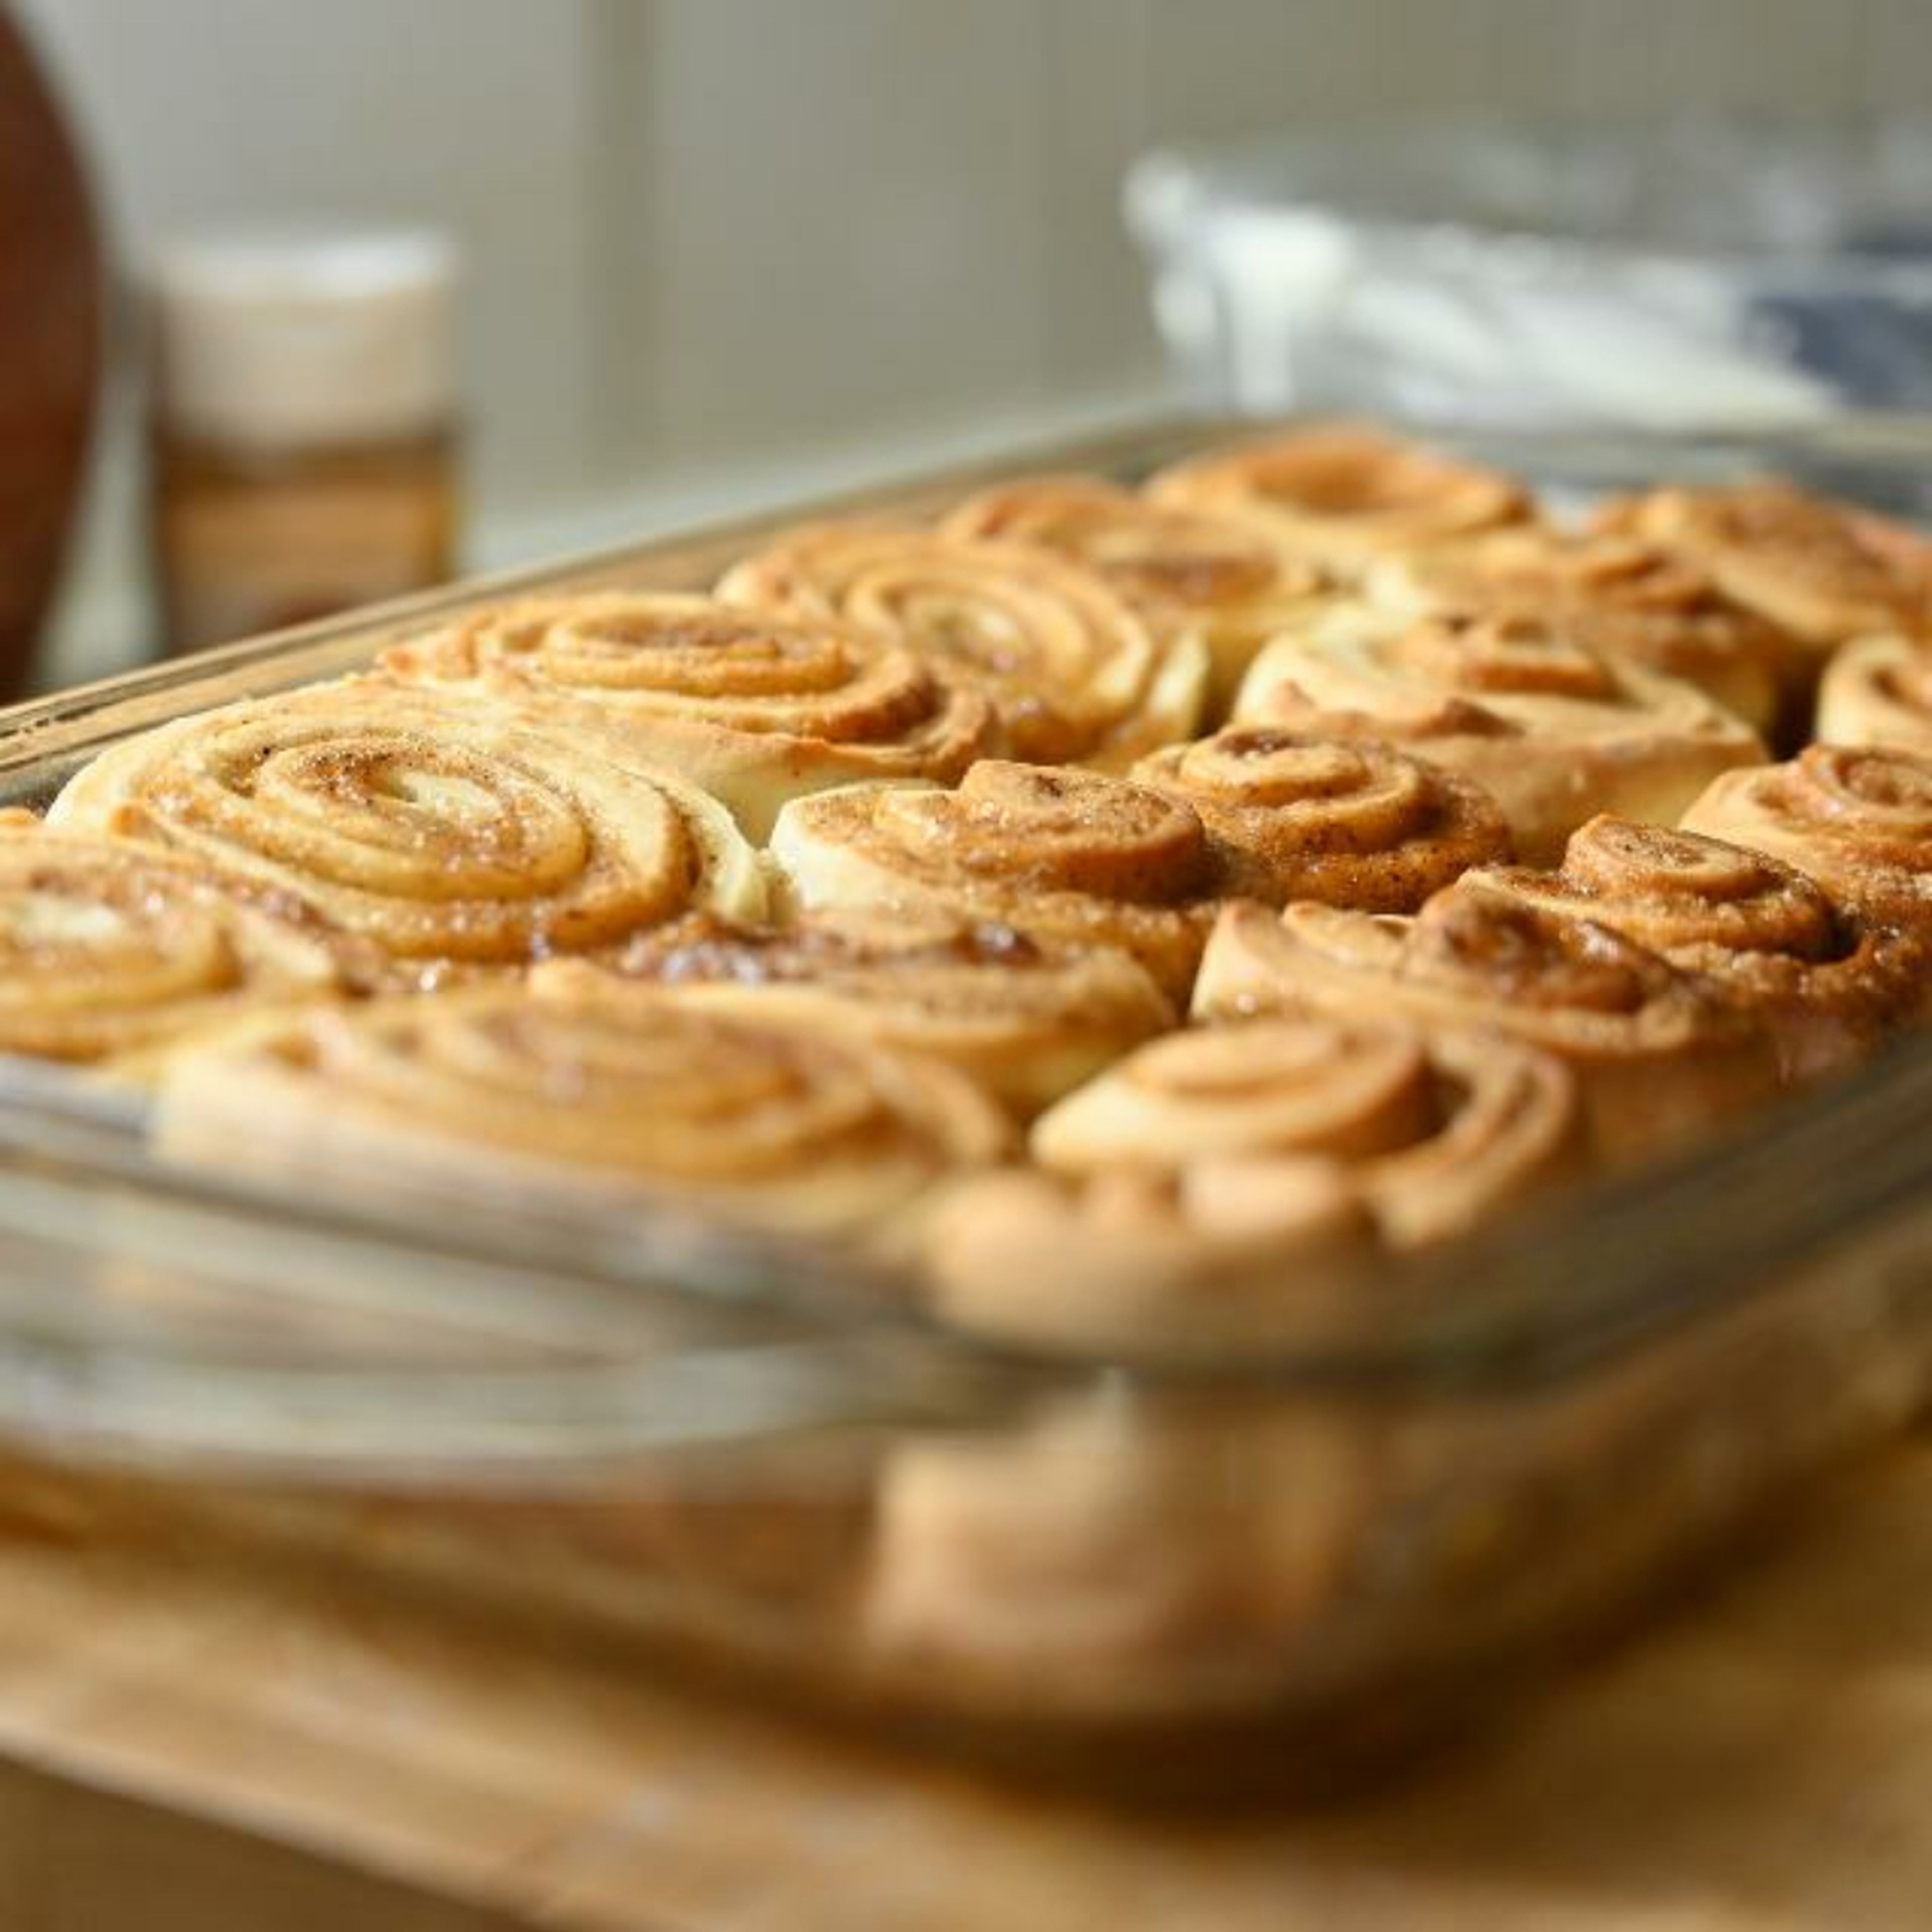 Let the cinnamon rolls cool for 10 minutes.